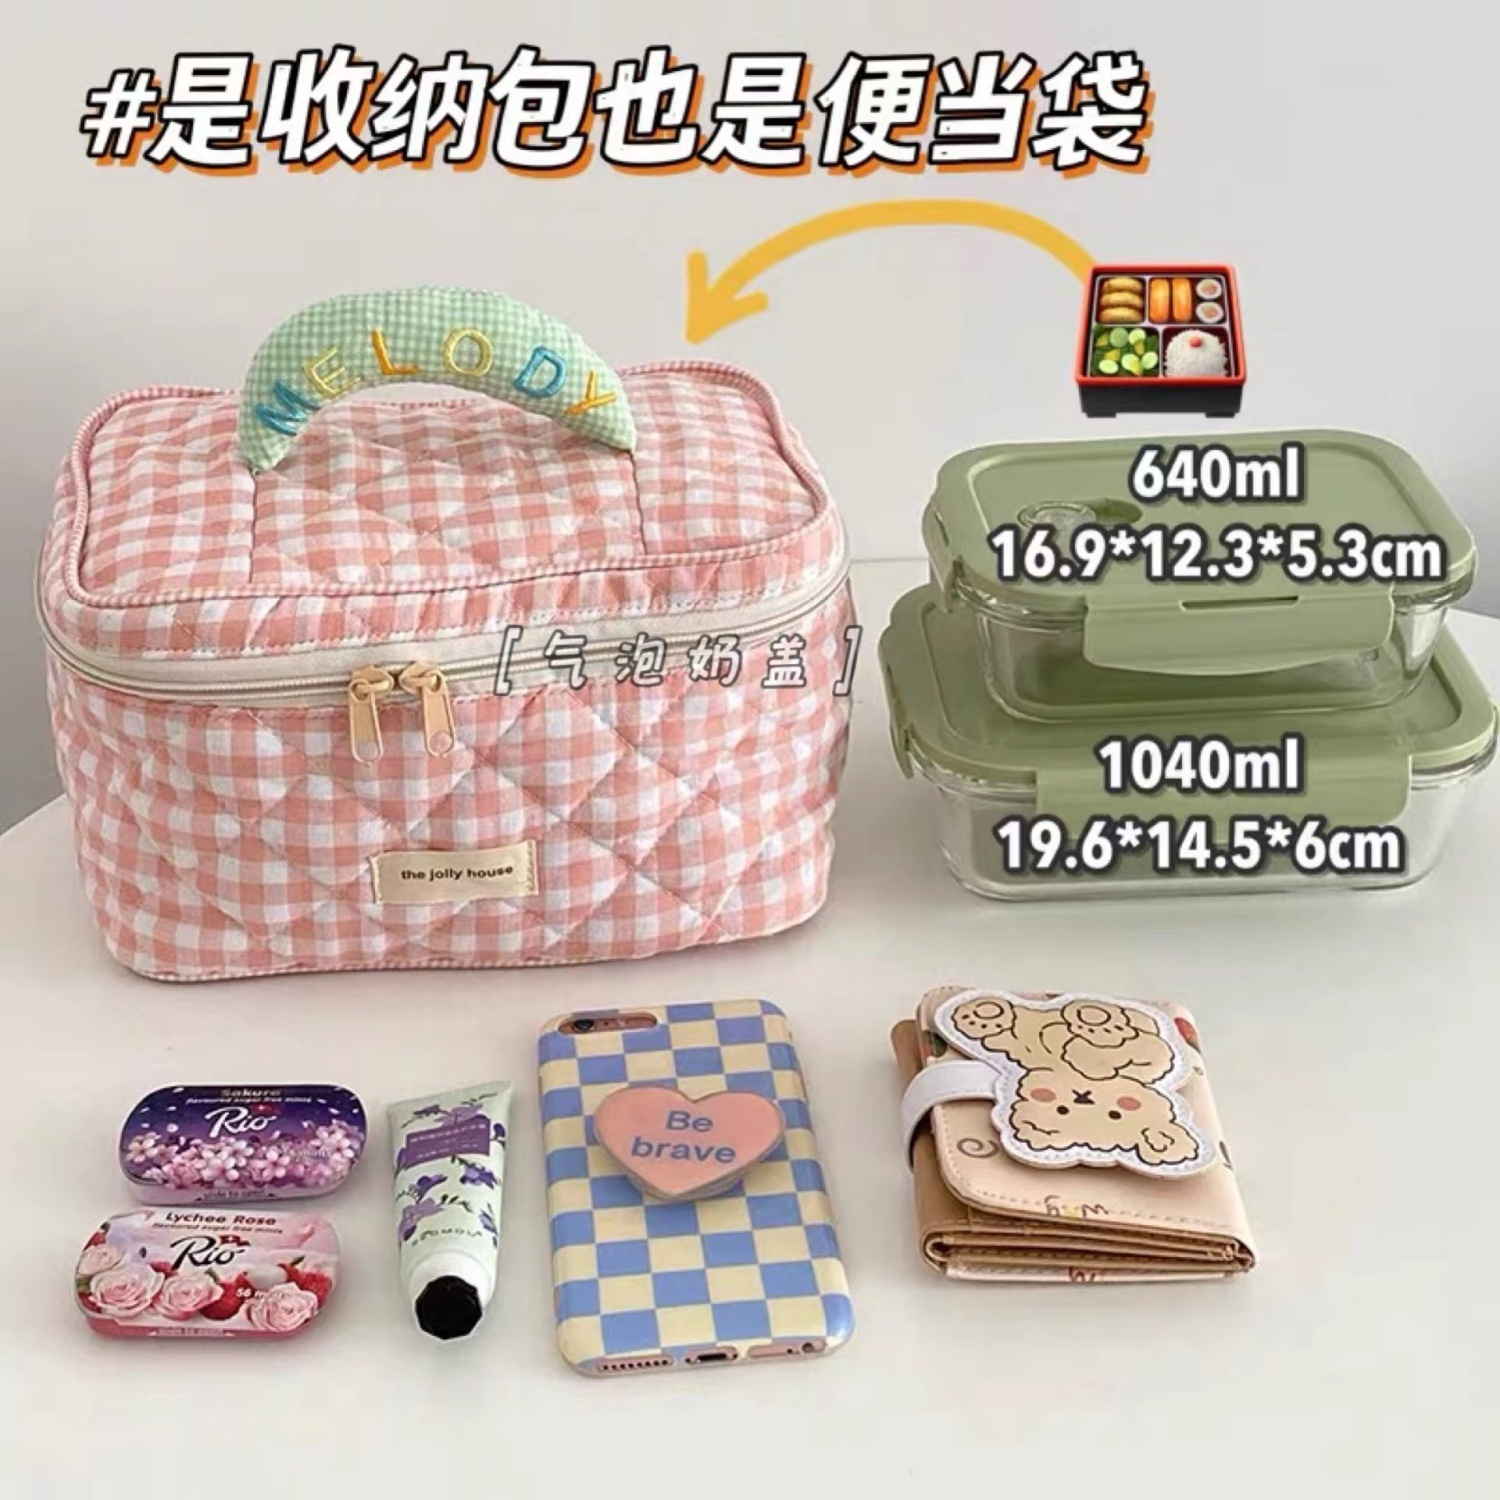 Small Fresh Korean Style Cosmetic Bag Embroidered Cotton Handbag Large Capacity Cosmetic Compartment Storage Bag for Women